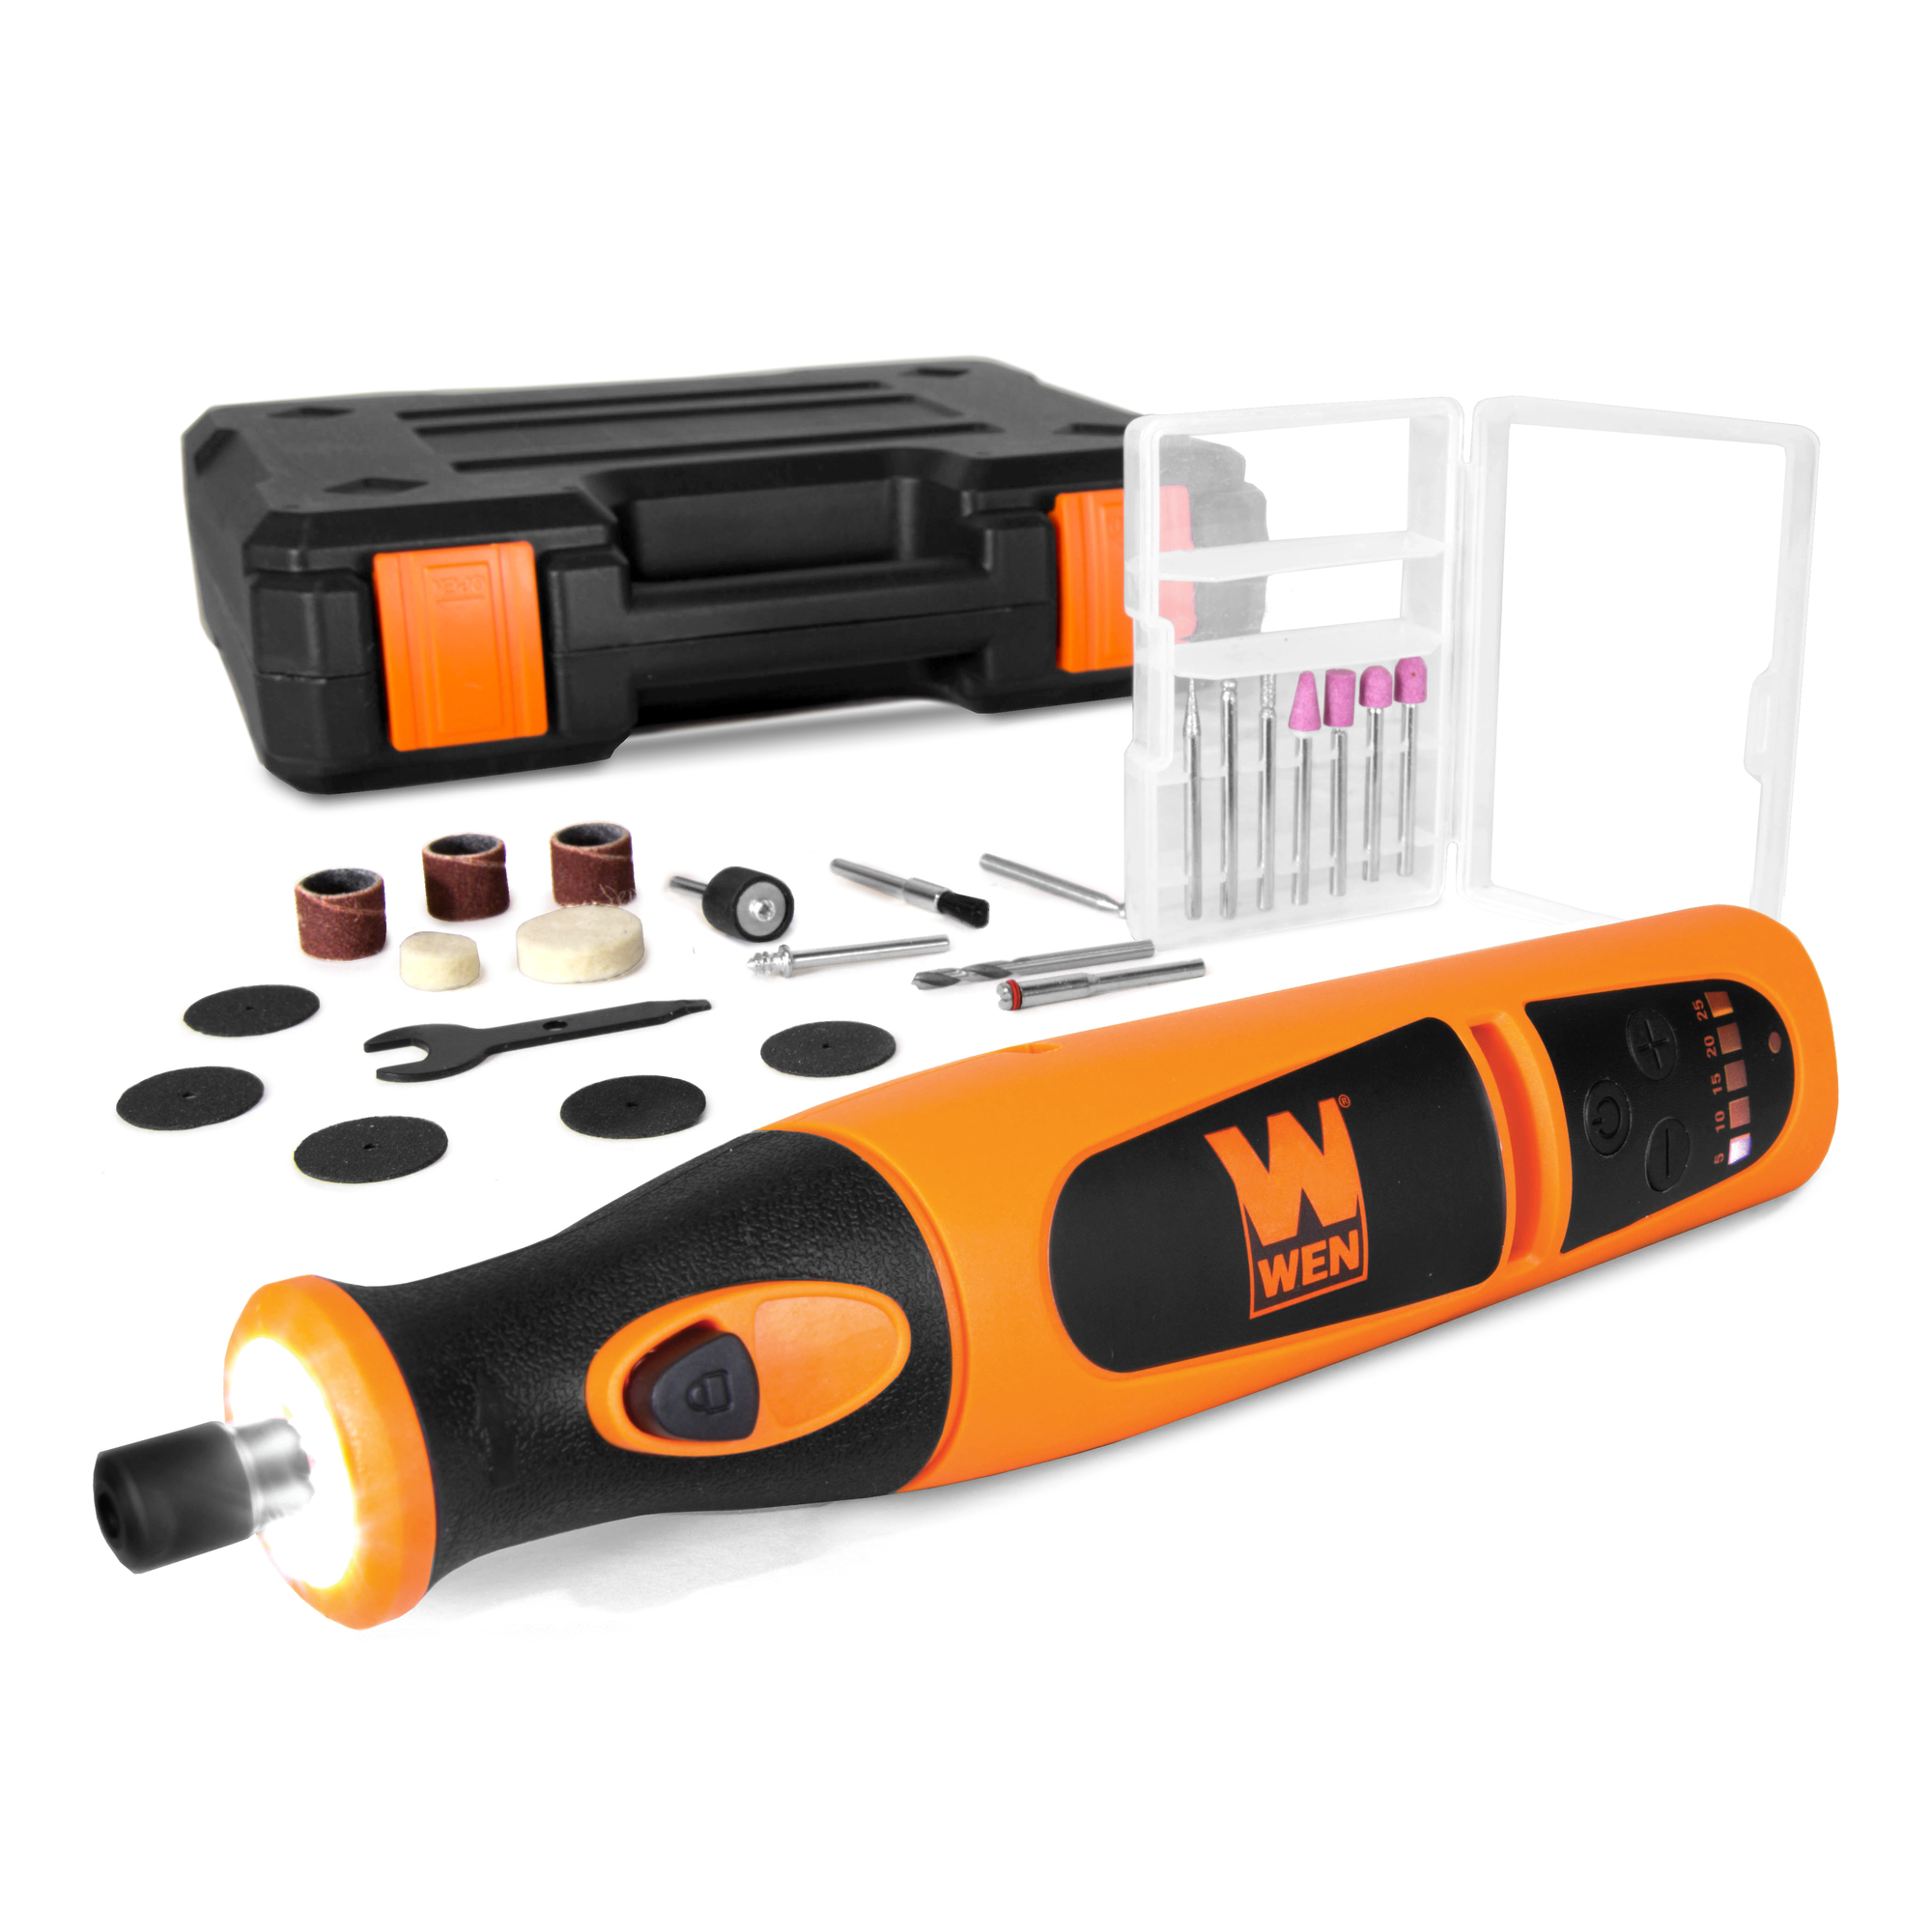 WEN, Cordless Rotary Tool w/ 24-pc, Charger, and Case, Max. Speed 25000 rpm, Volts 7.2 Model 23072